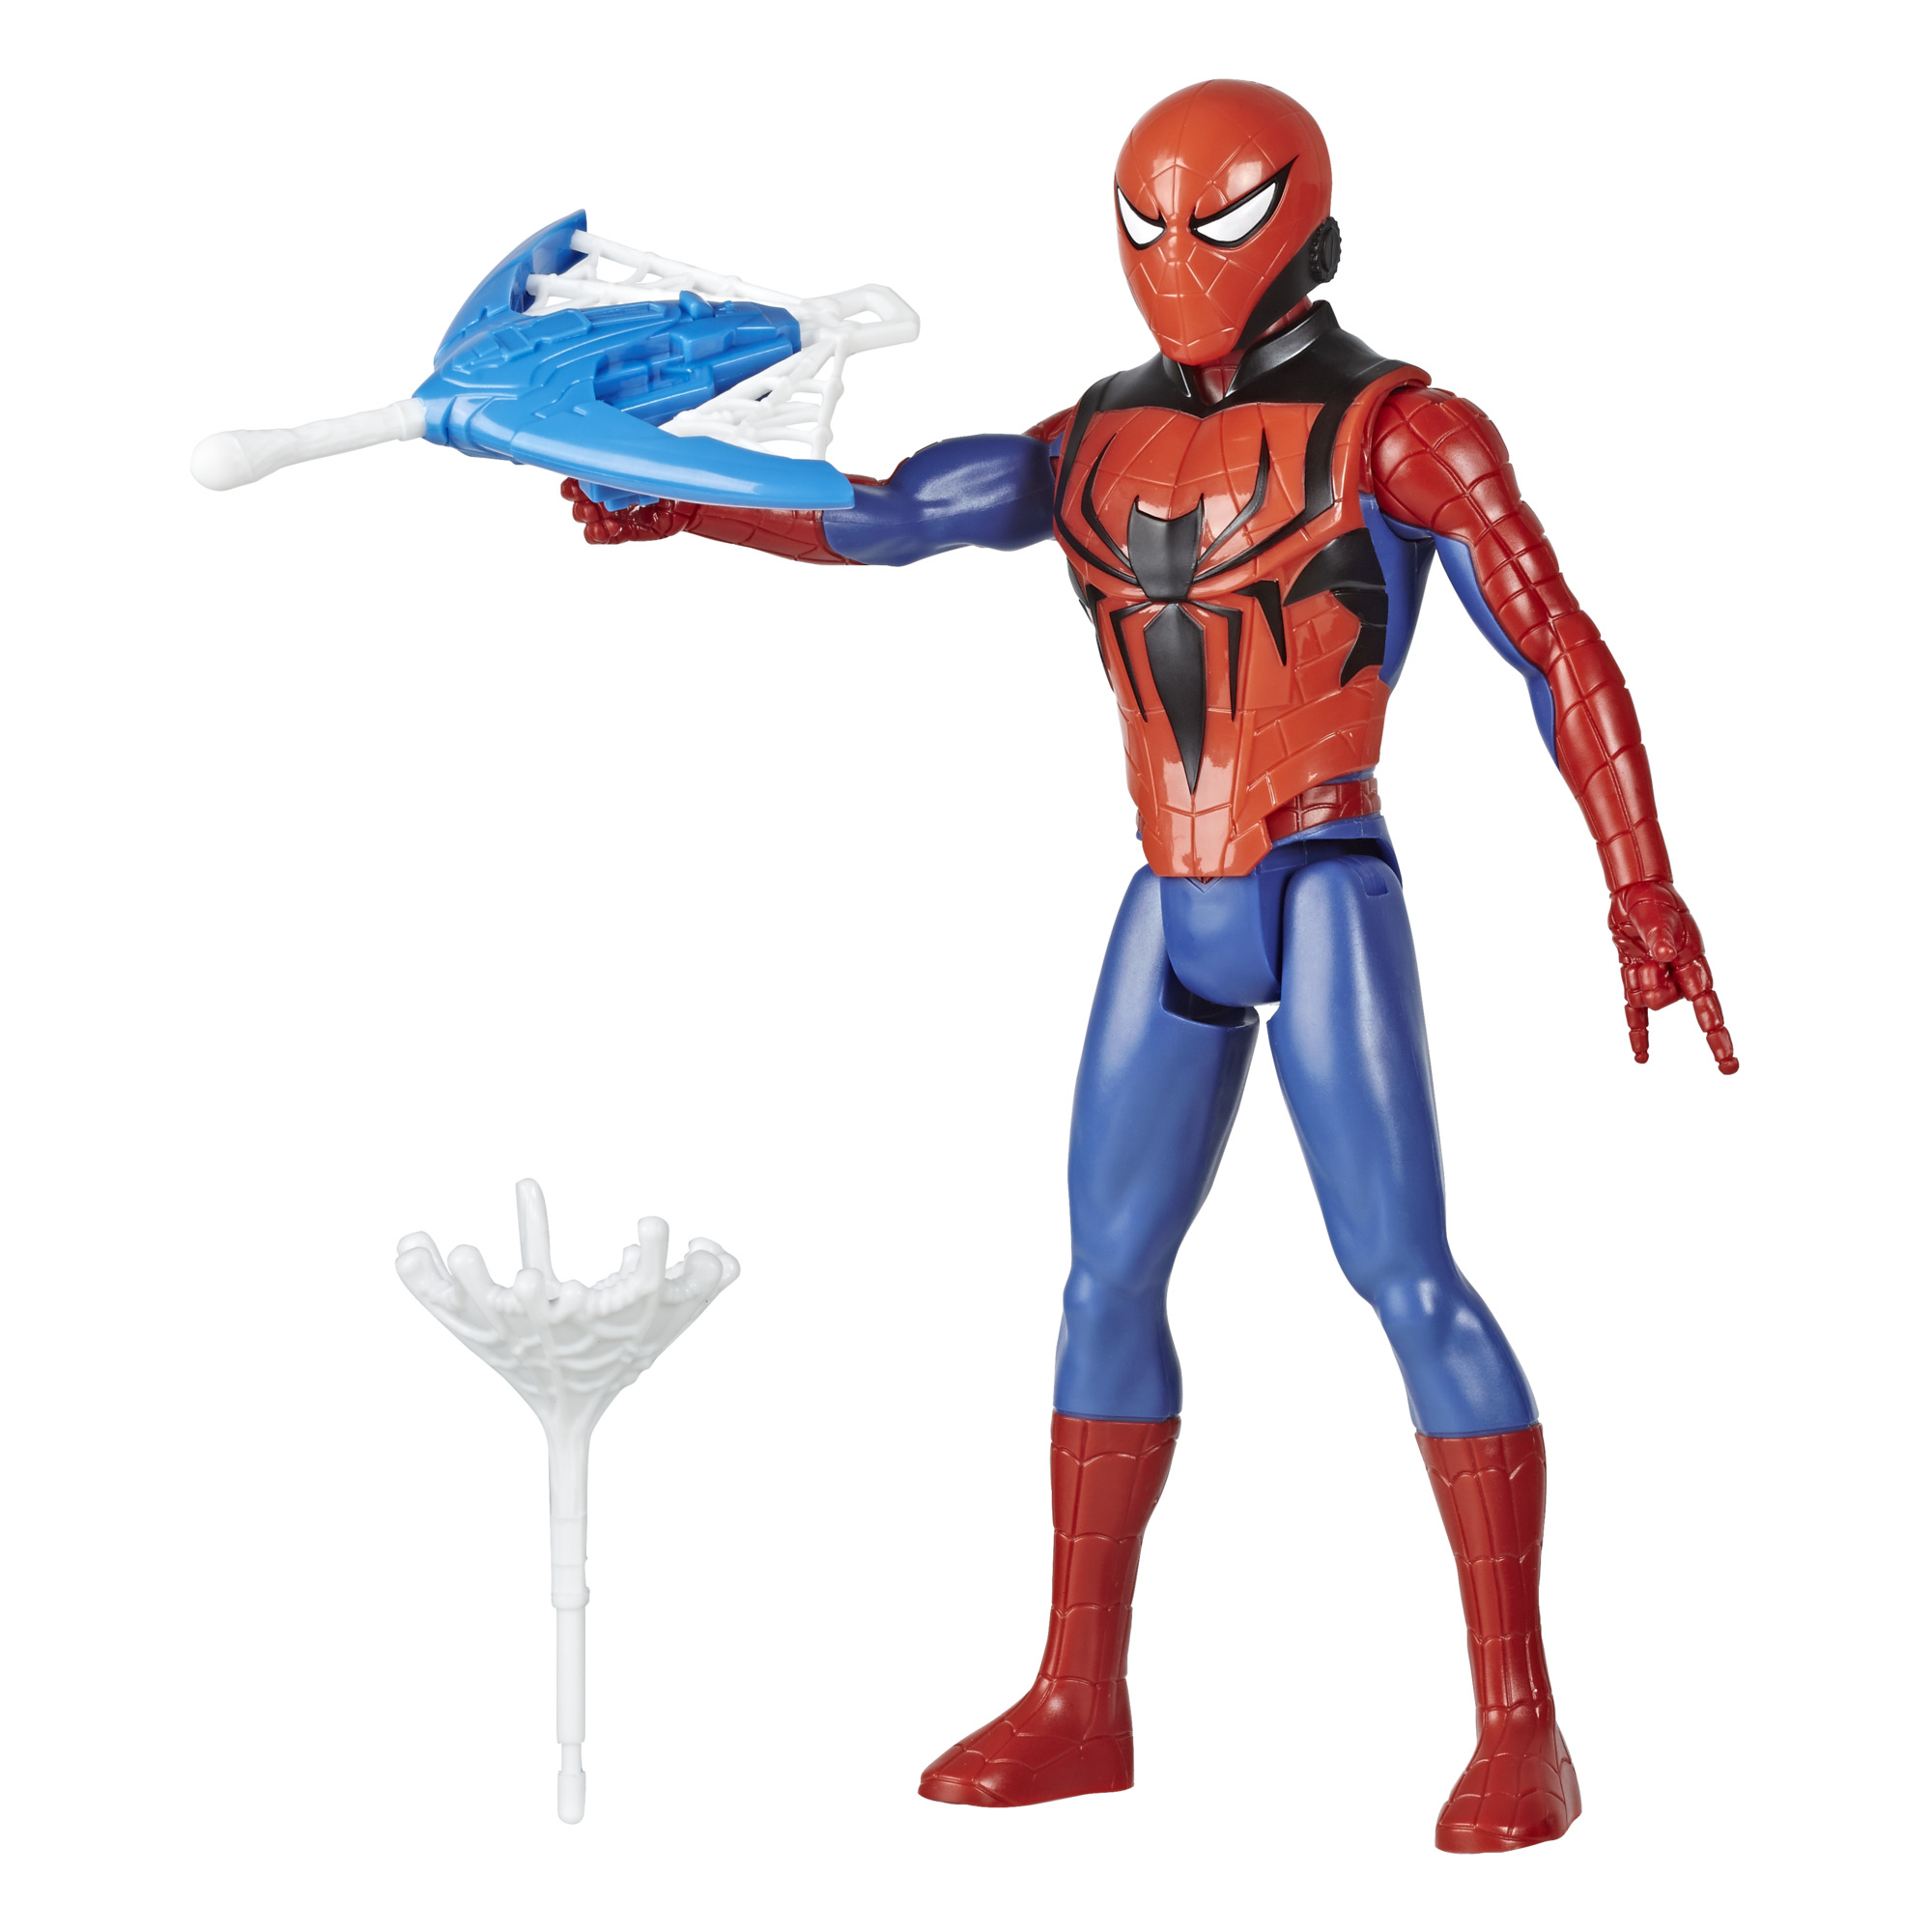 Marvel: Titan Hero Series Spiderman Blast Gear Kids Toy Action Figure for Boys and Girls with Launcher (9”) - image 1 of 12